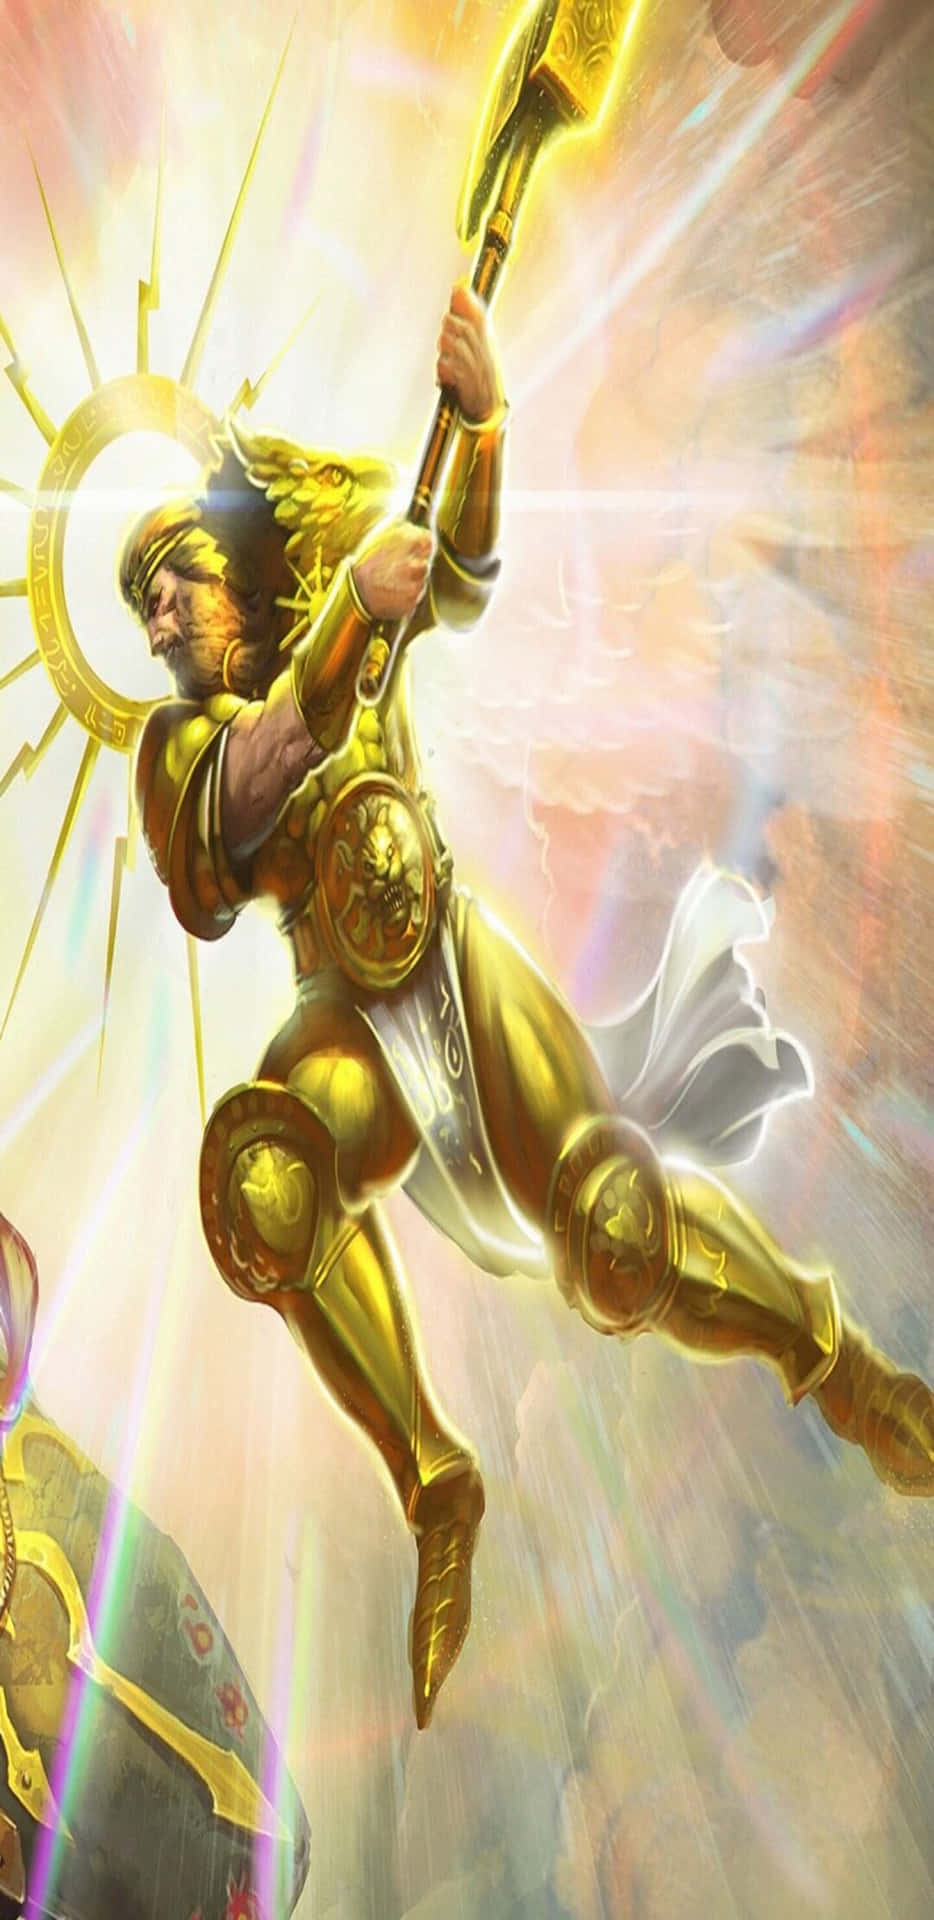 A Golden Man With A Sword In His Hand